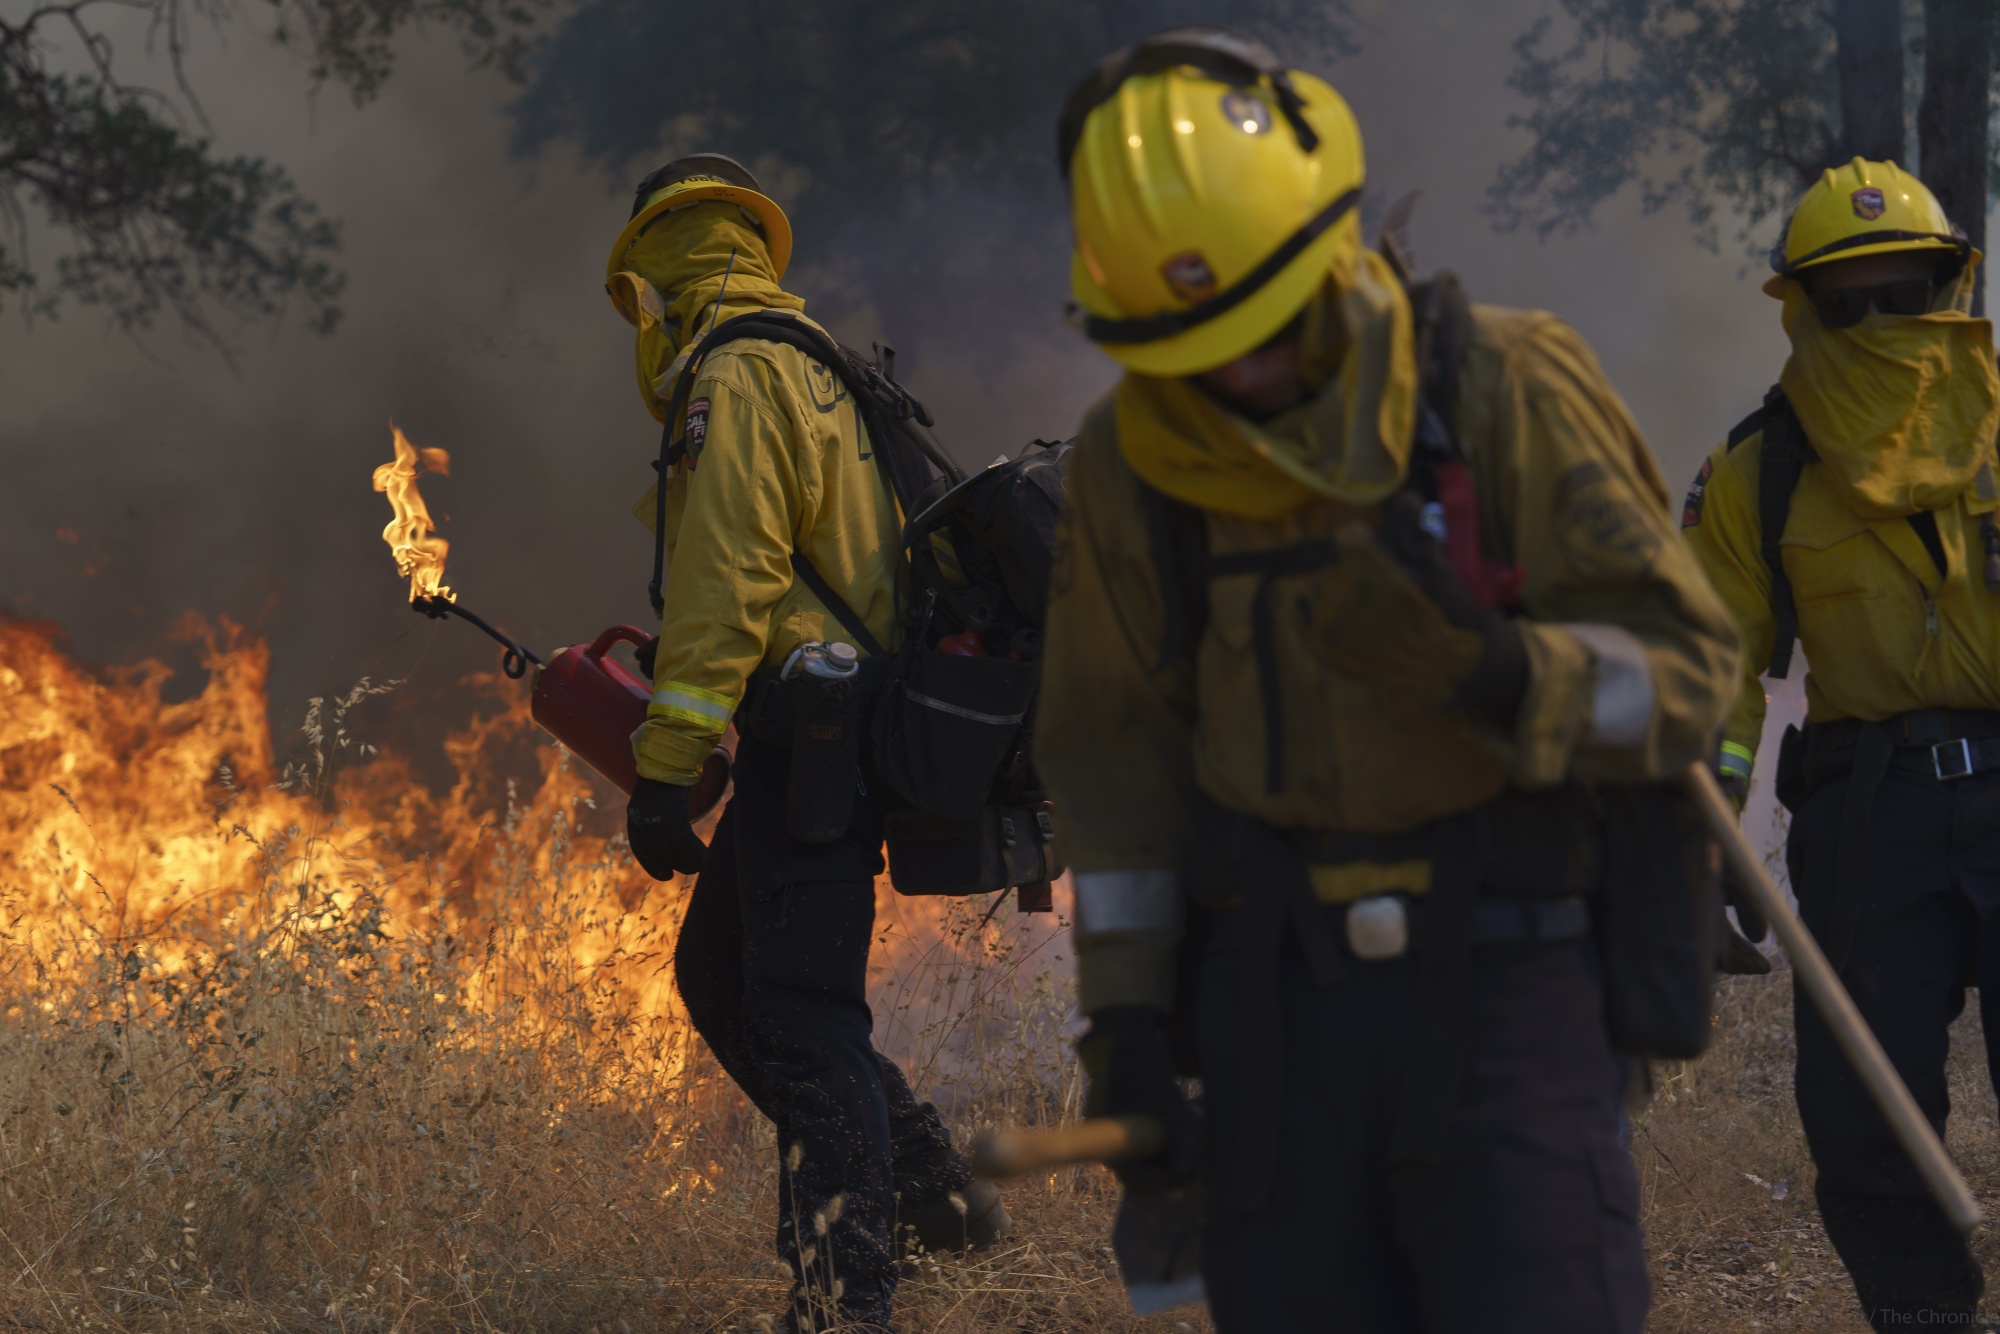 A CalFire firefighter uses a drip torch during a prescribed burn in Groveland, California. Controlled blazes are just one of the many ways the world can adapt to climate change.